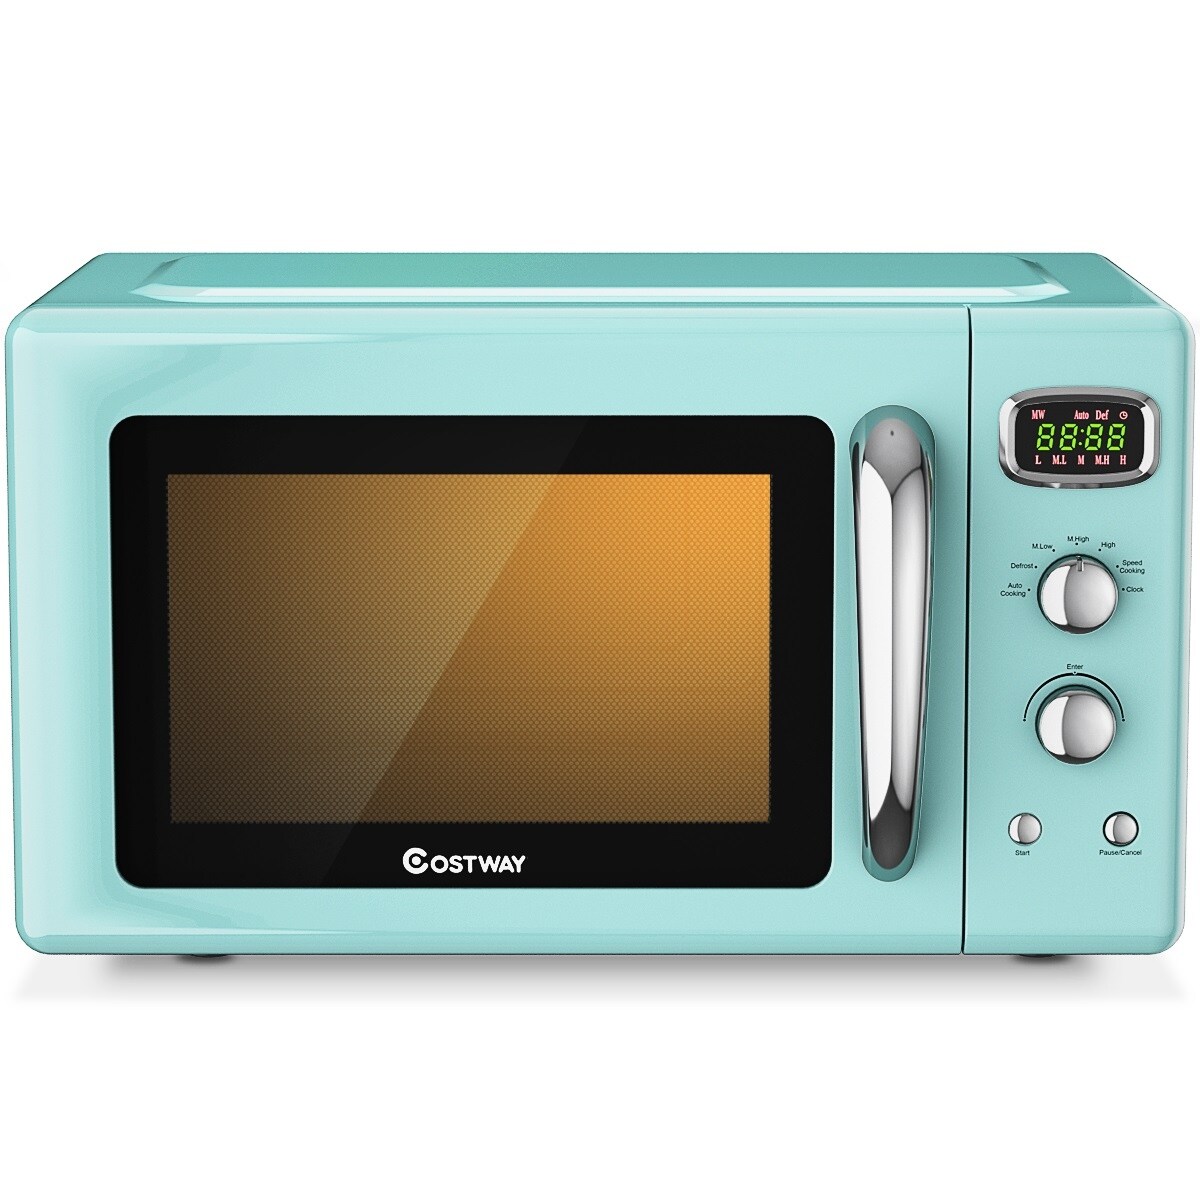 0.9 Cu.Ft Countertop Microwave Oven-Black - On Sale - Bed Bath & Beyond -  37080011